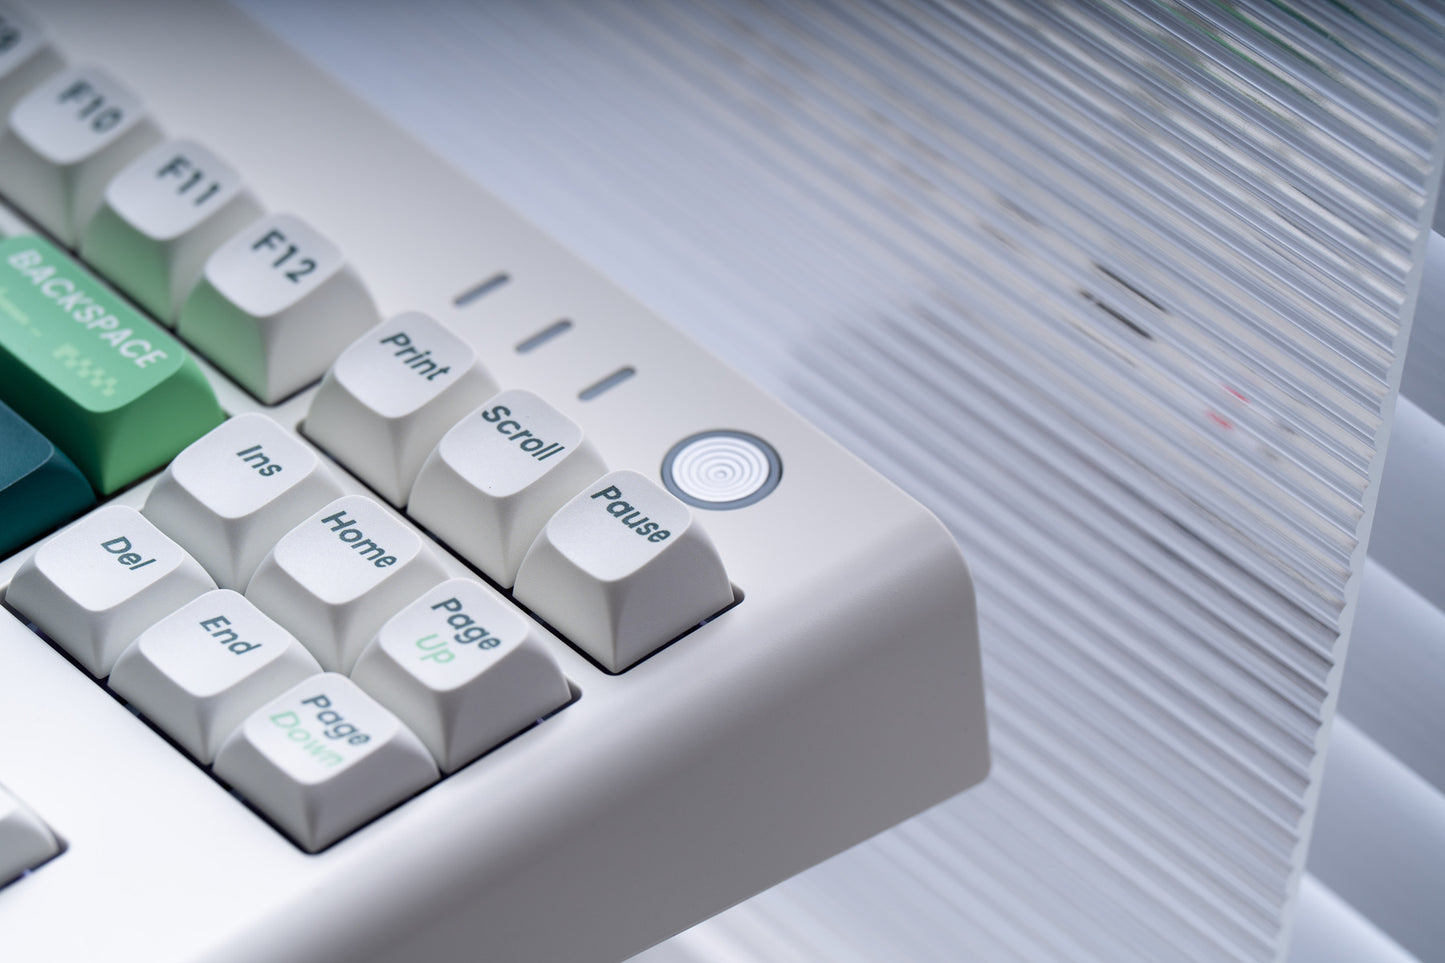 LIO87 TOP-LIKE MOUNT WIRELESS RGB HOT-SWAPPABLE PRE-BUILD MECHANICAL KEYBOARD